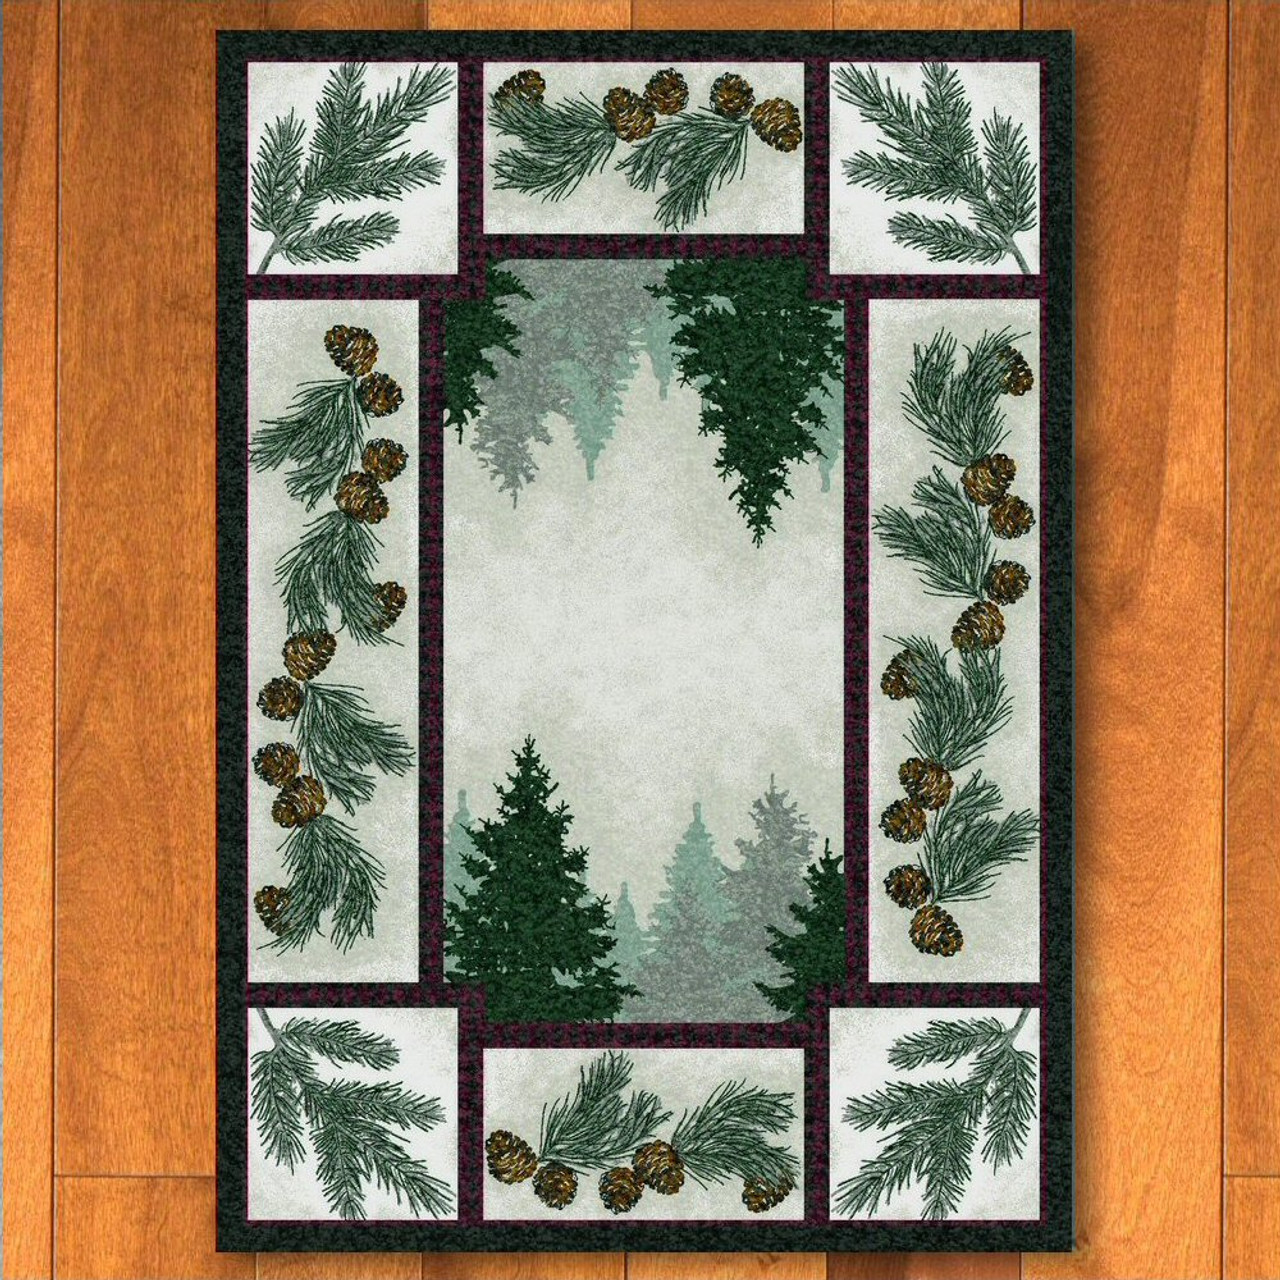 8 x 11 Valley Forest Rug 